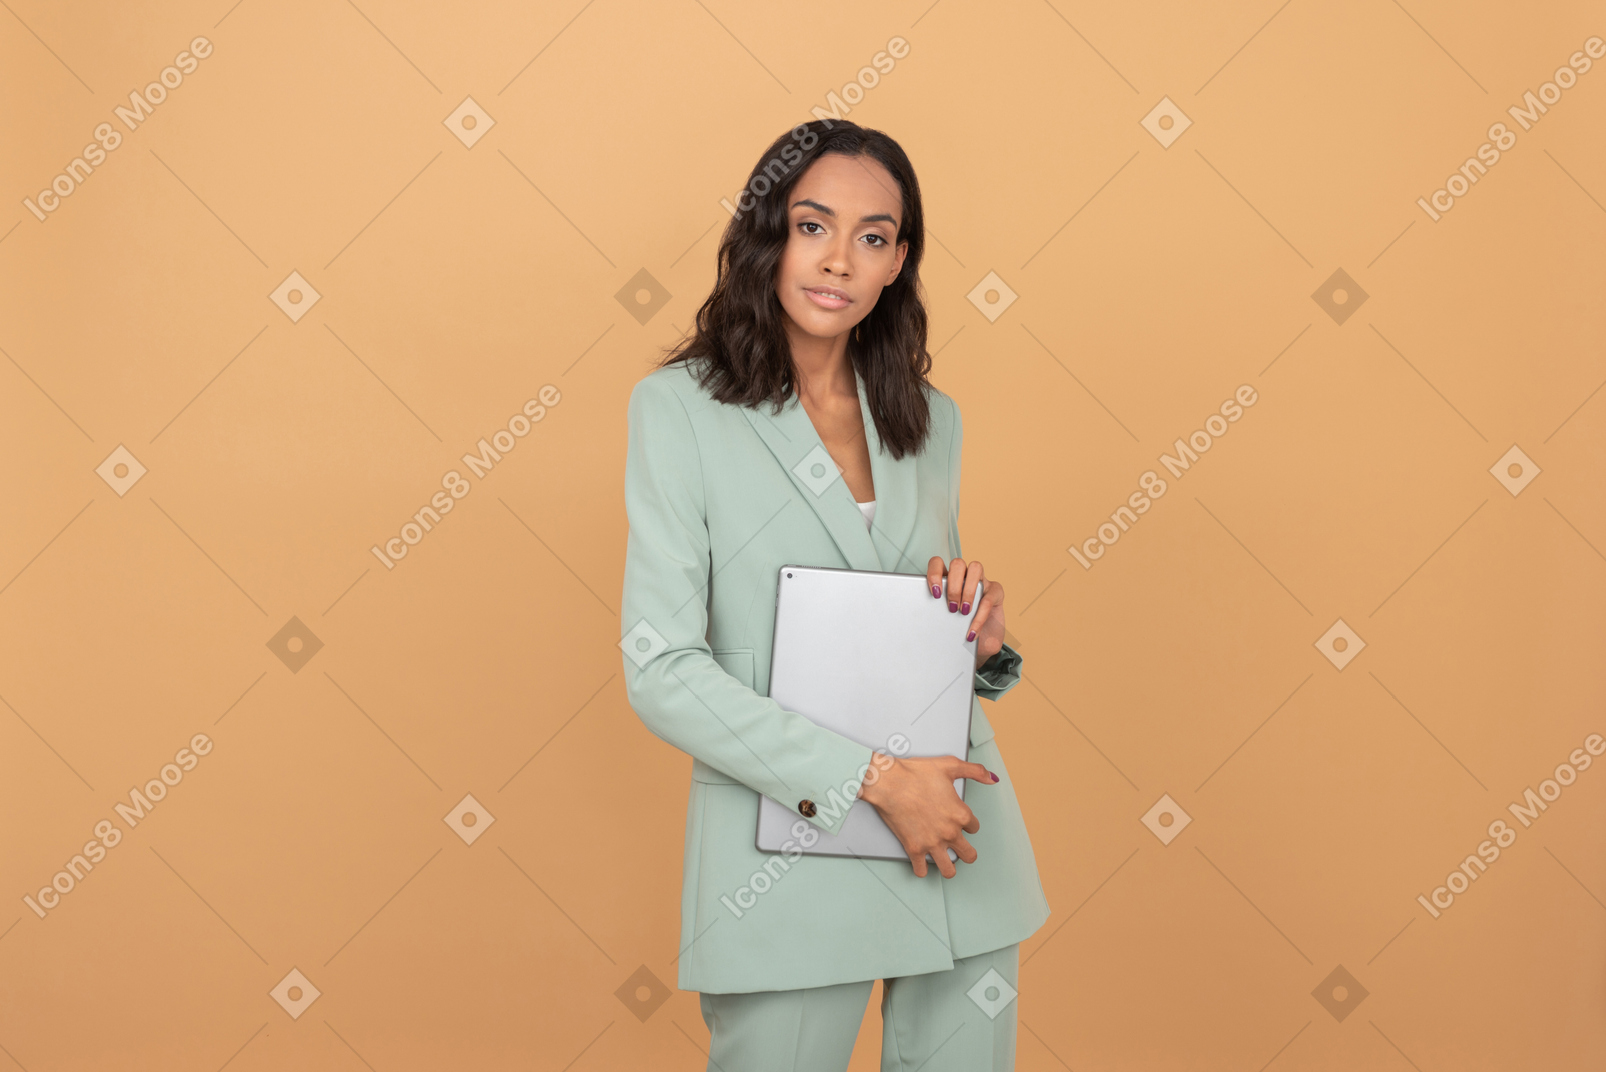 Attractive young office worker holding a digital tablet